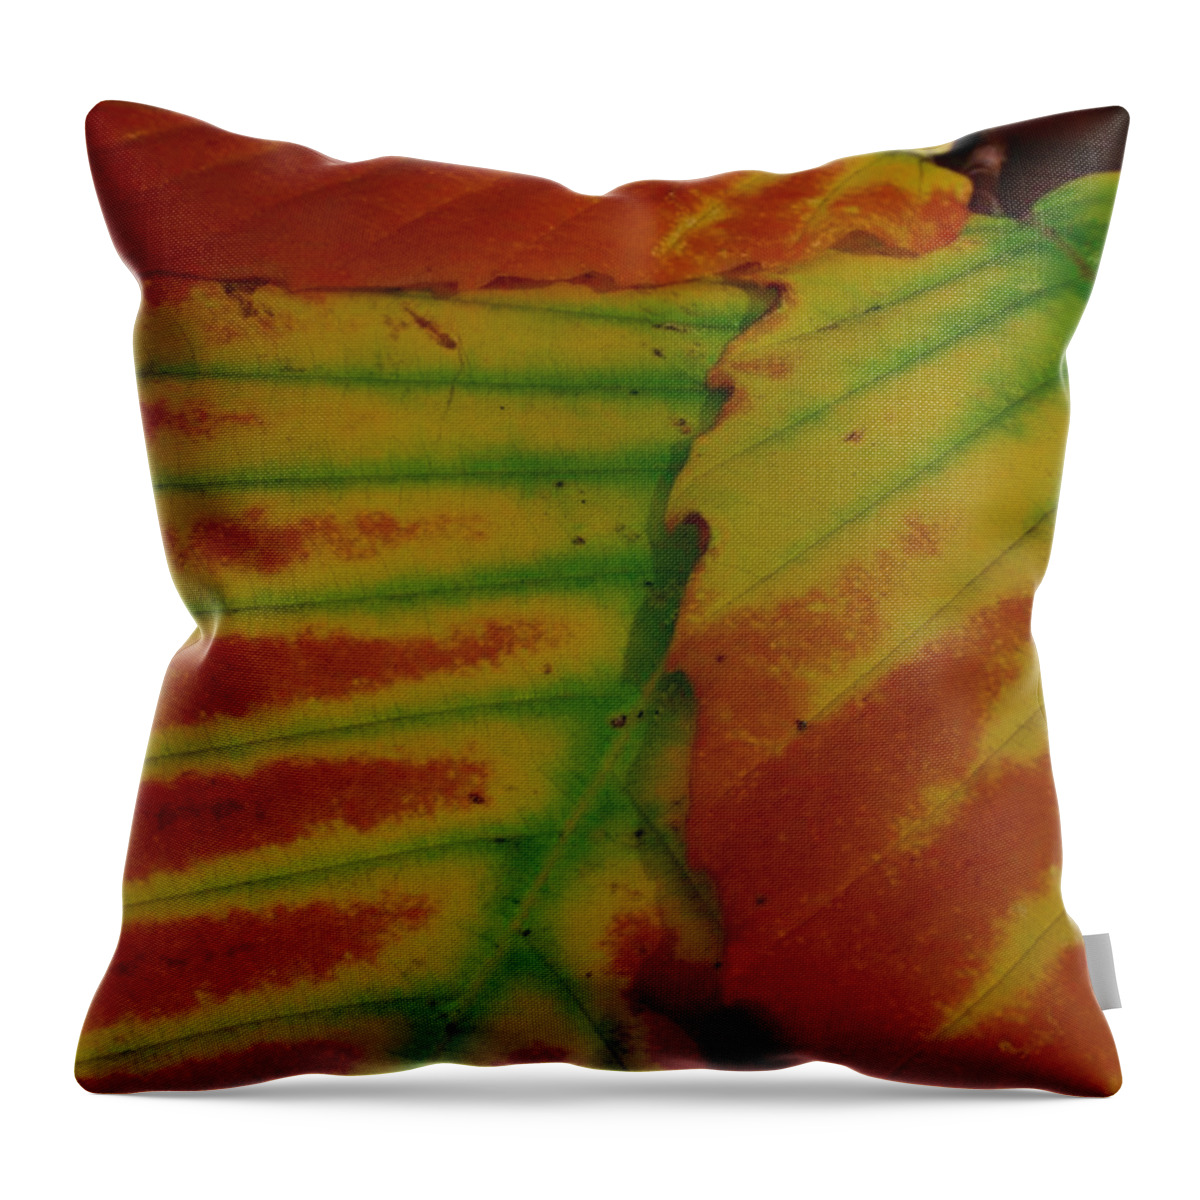 Leaf Throw Pillow featuring the photograph Fall Leafs by Juergen Roth